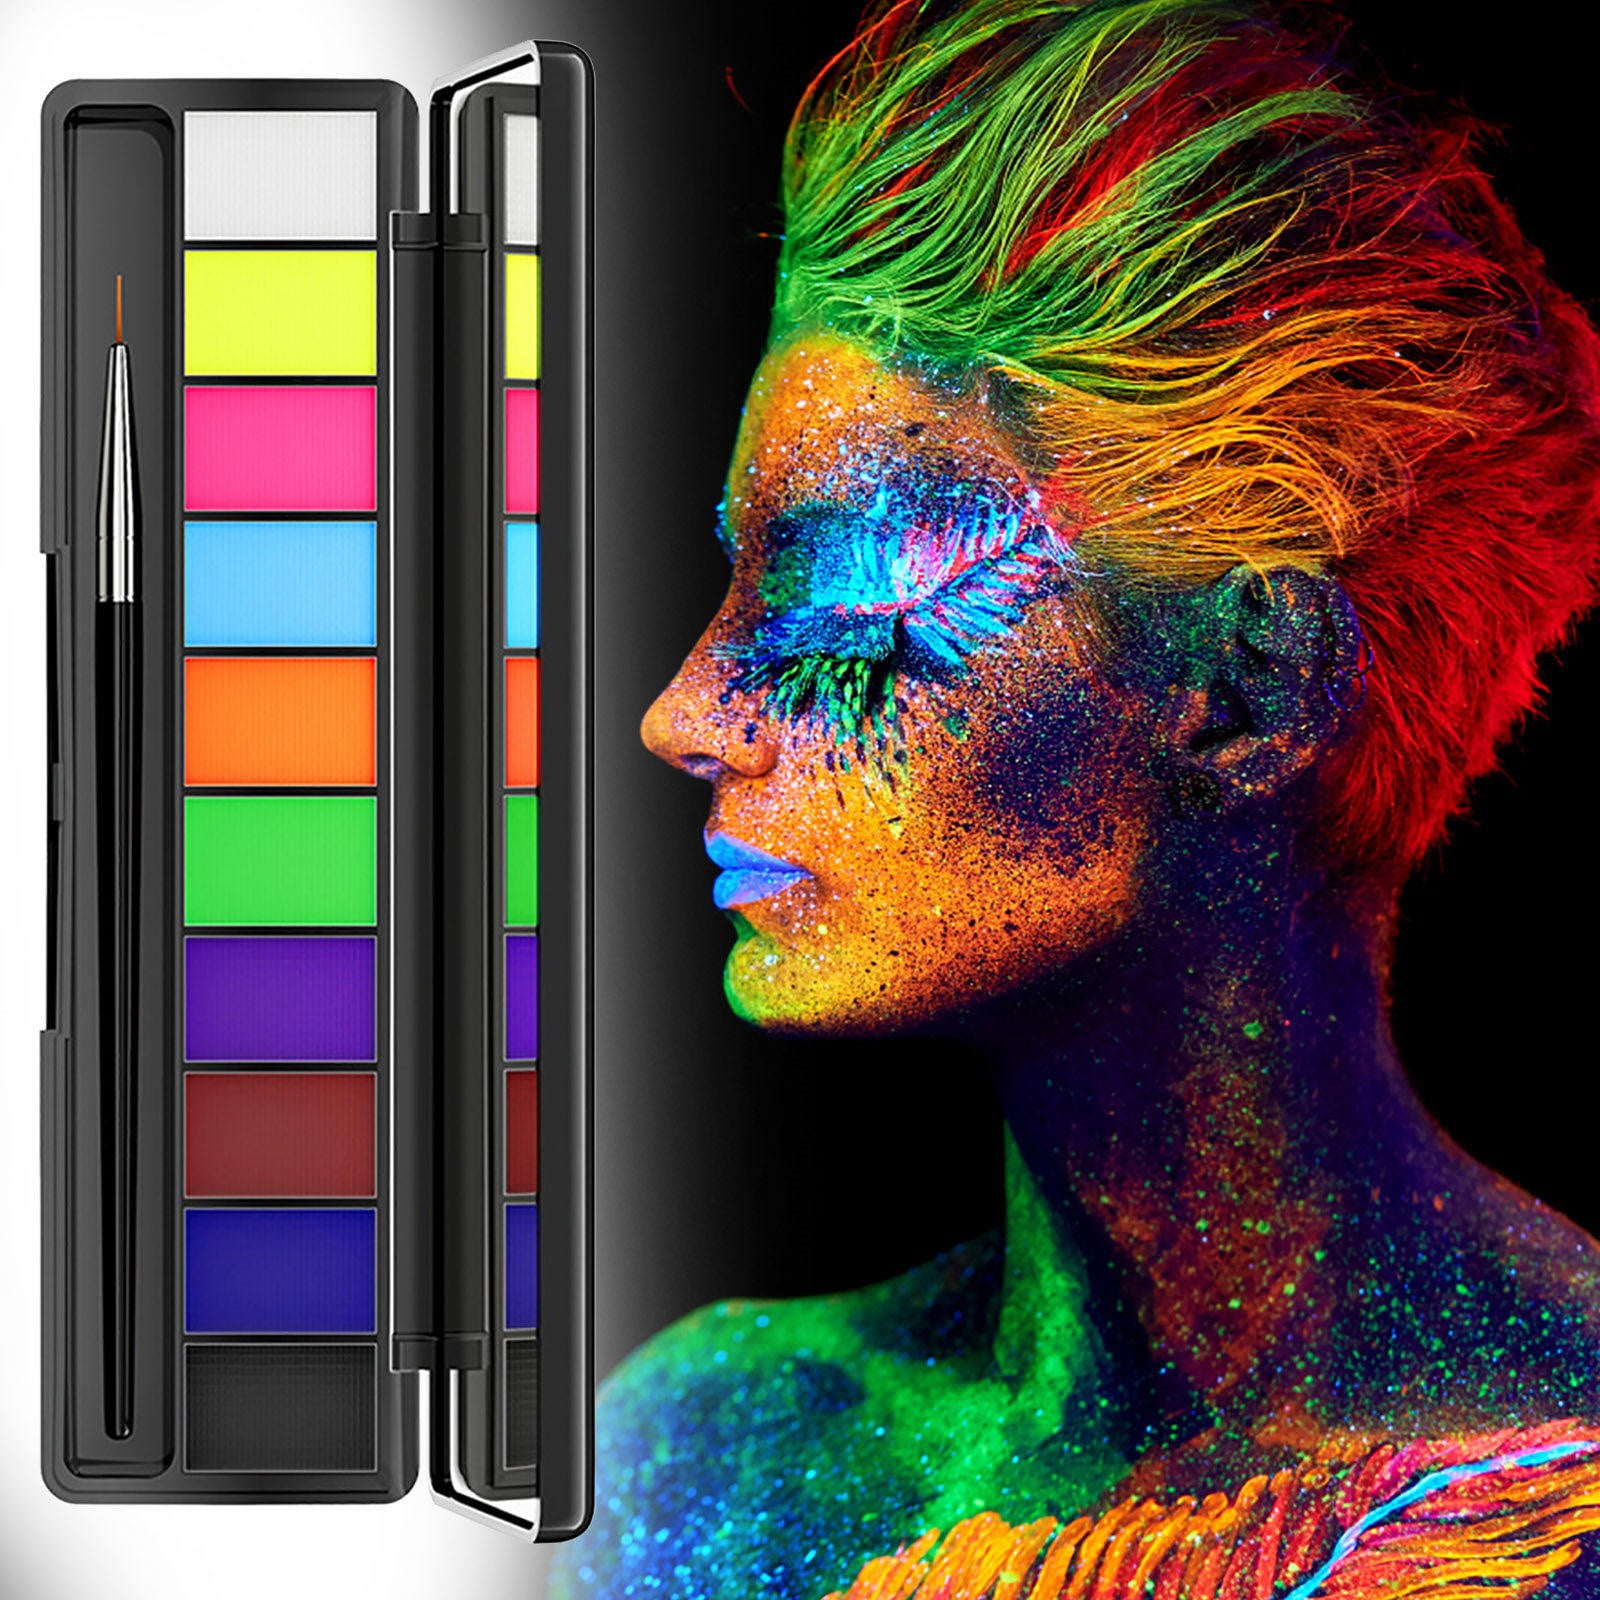 BVENDANO Professional Face Painting Kit for Kids Adults 22x10 gm One Stroke  Split Cake Face Paint Palette Water Based Pro Quality Body Paint Rainbow